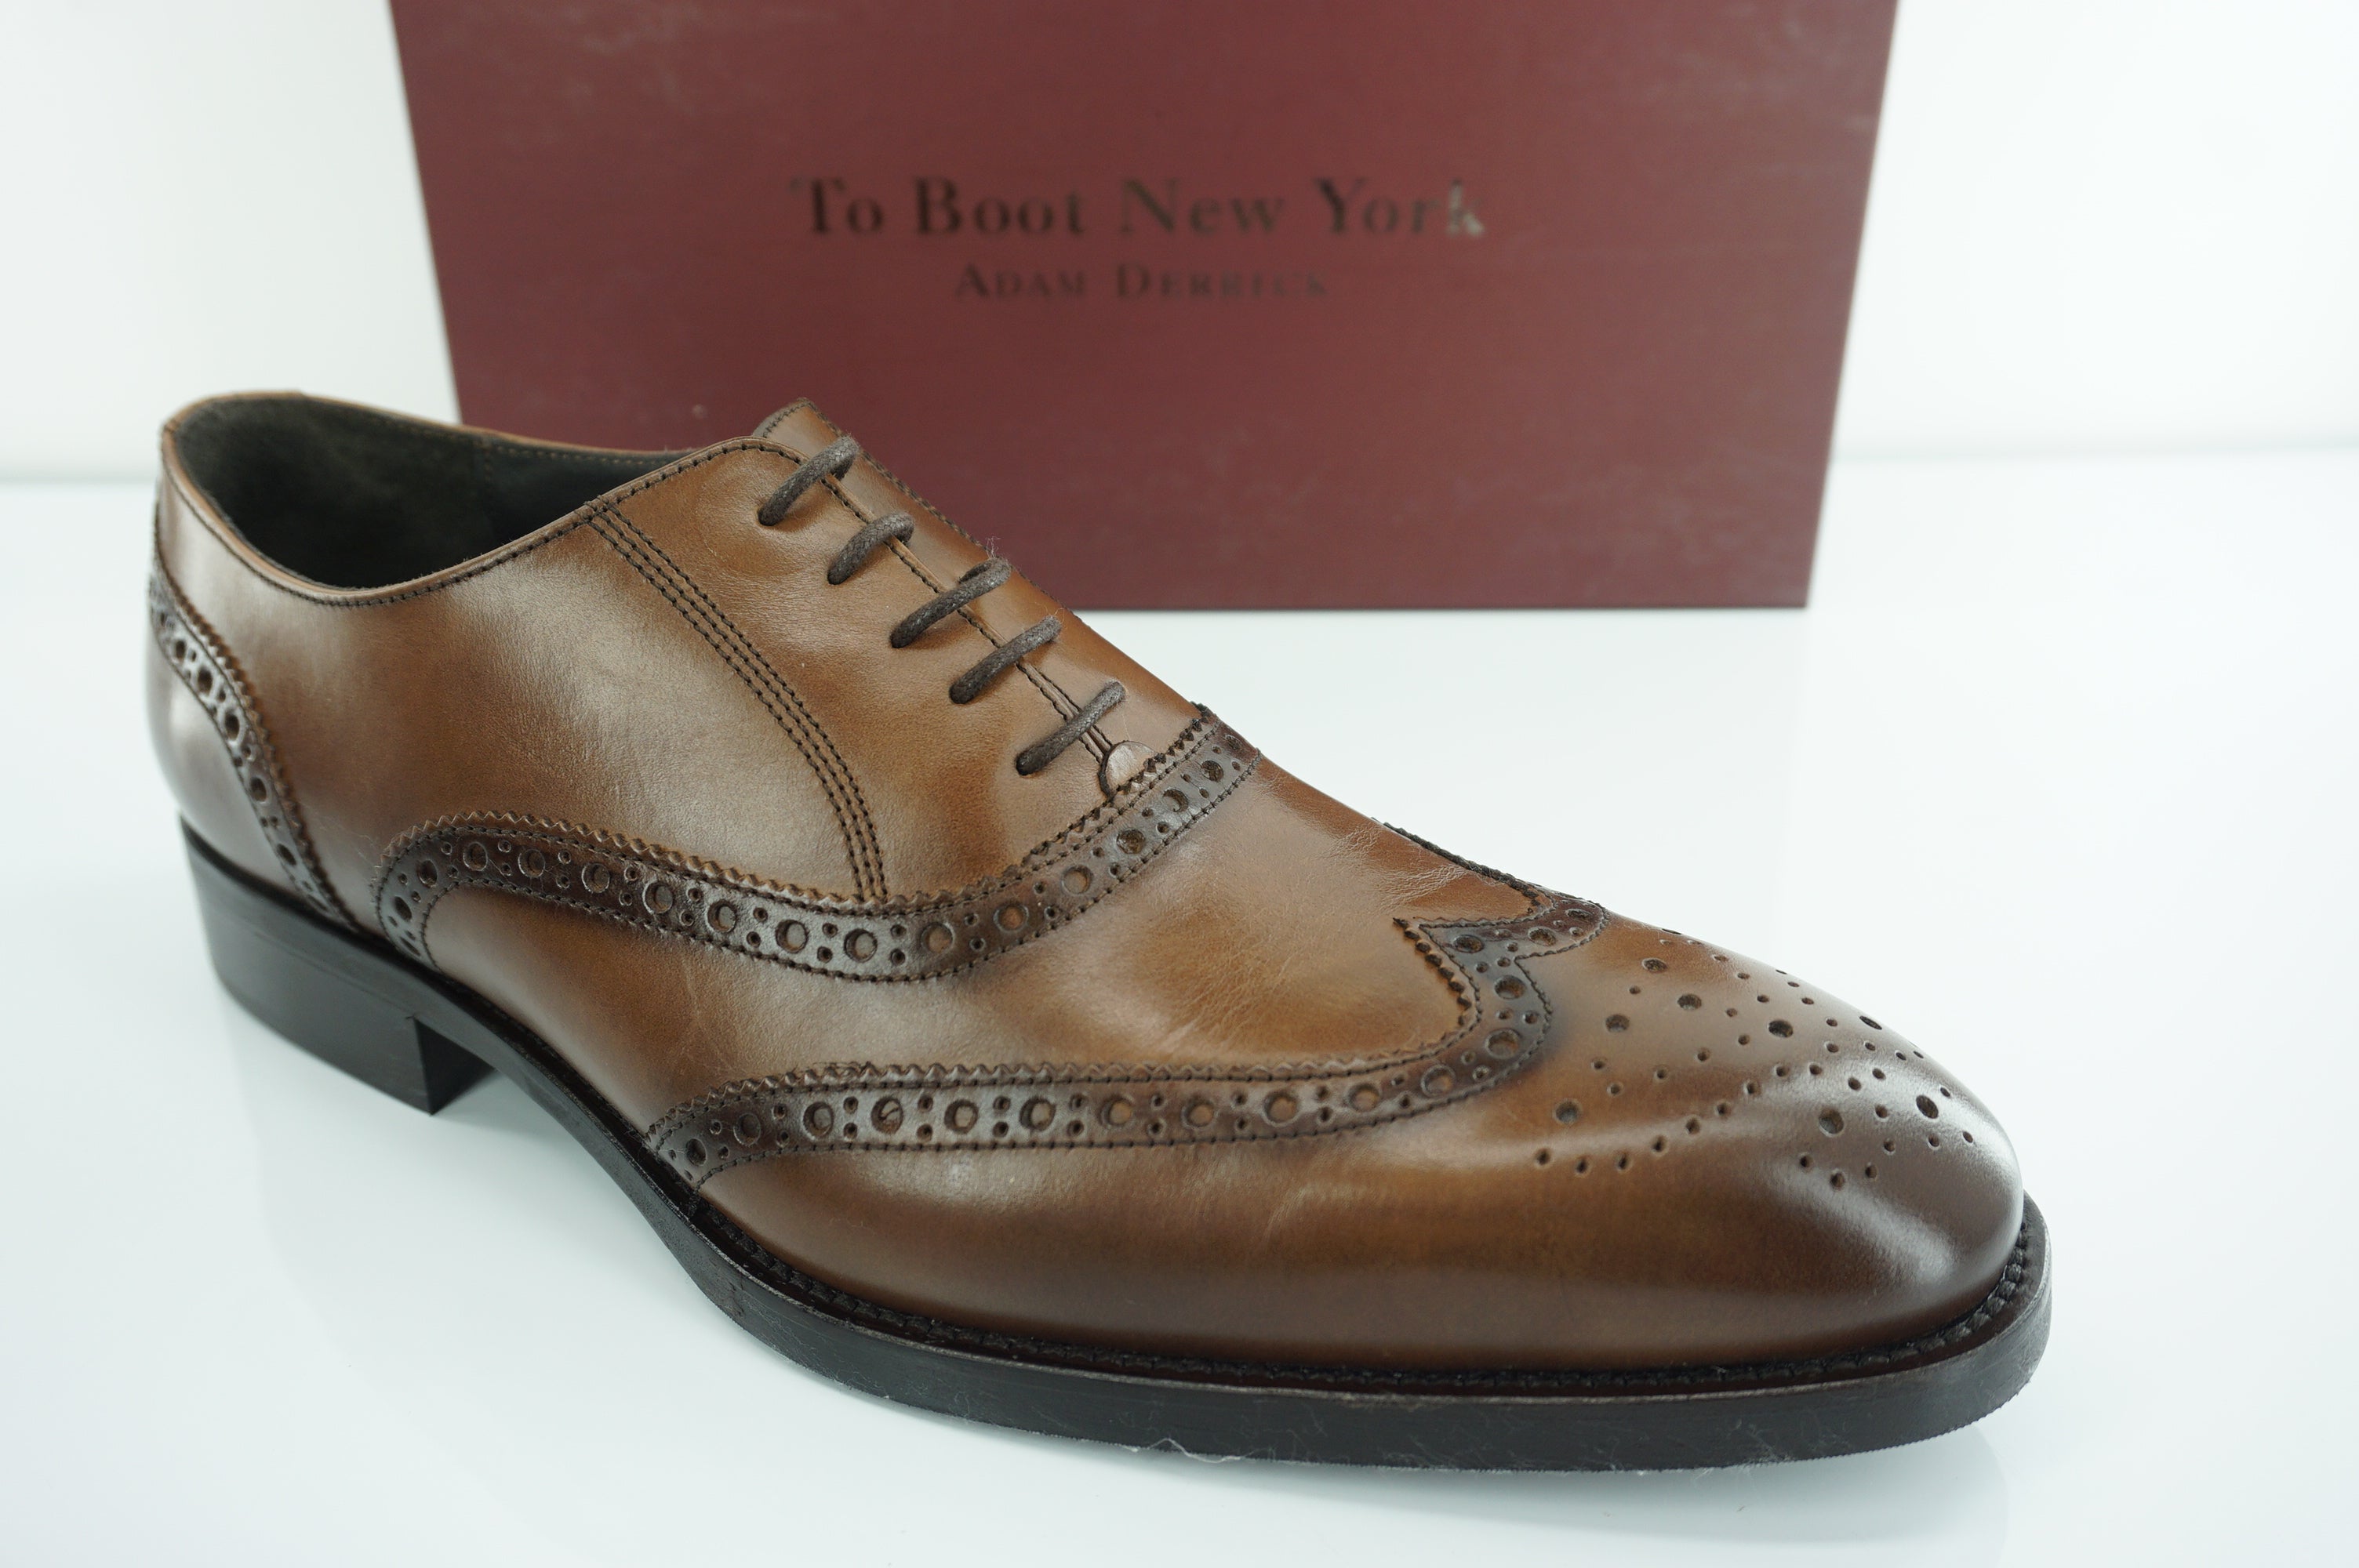 To Boot New York Brown Leather Bello Wingtip Brogue Oxfords size 9.5 NIB $425